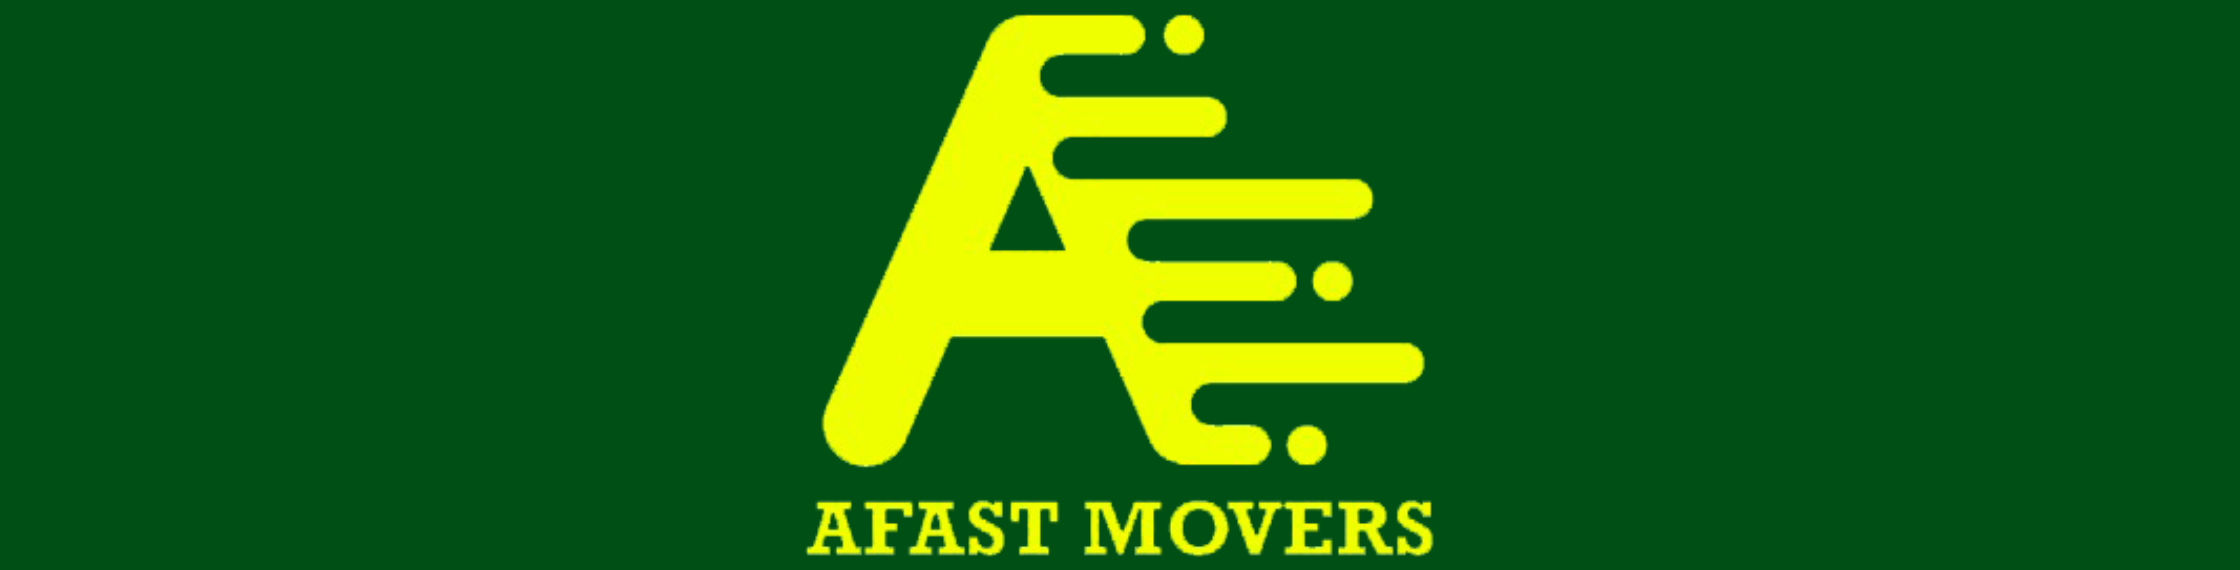 afastmovers-muthu-digital-client